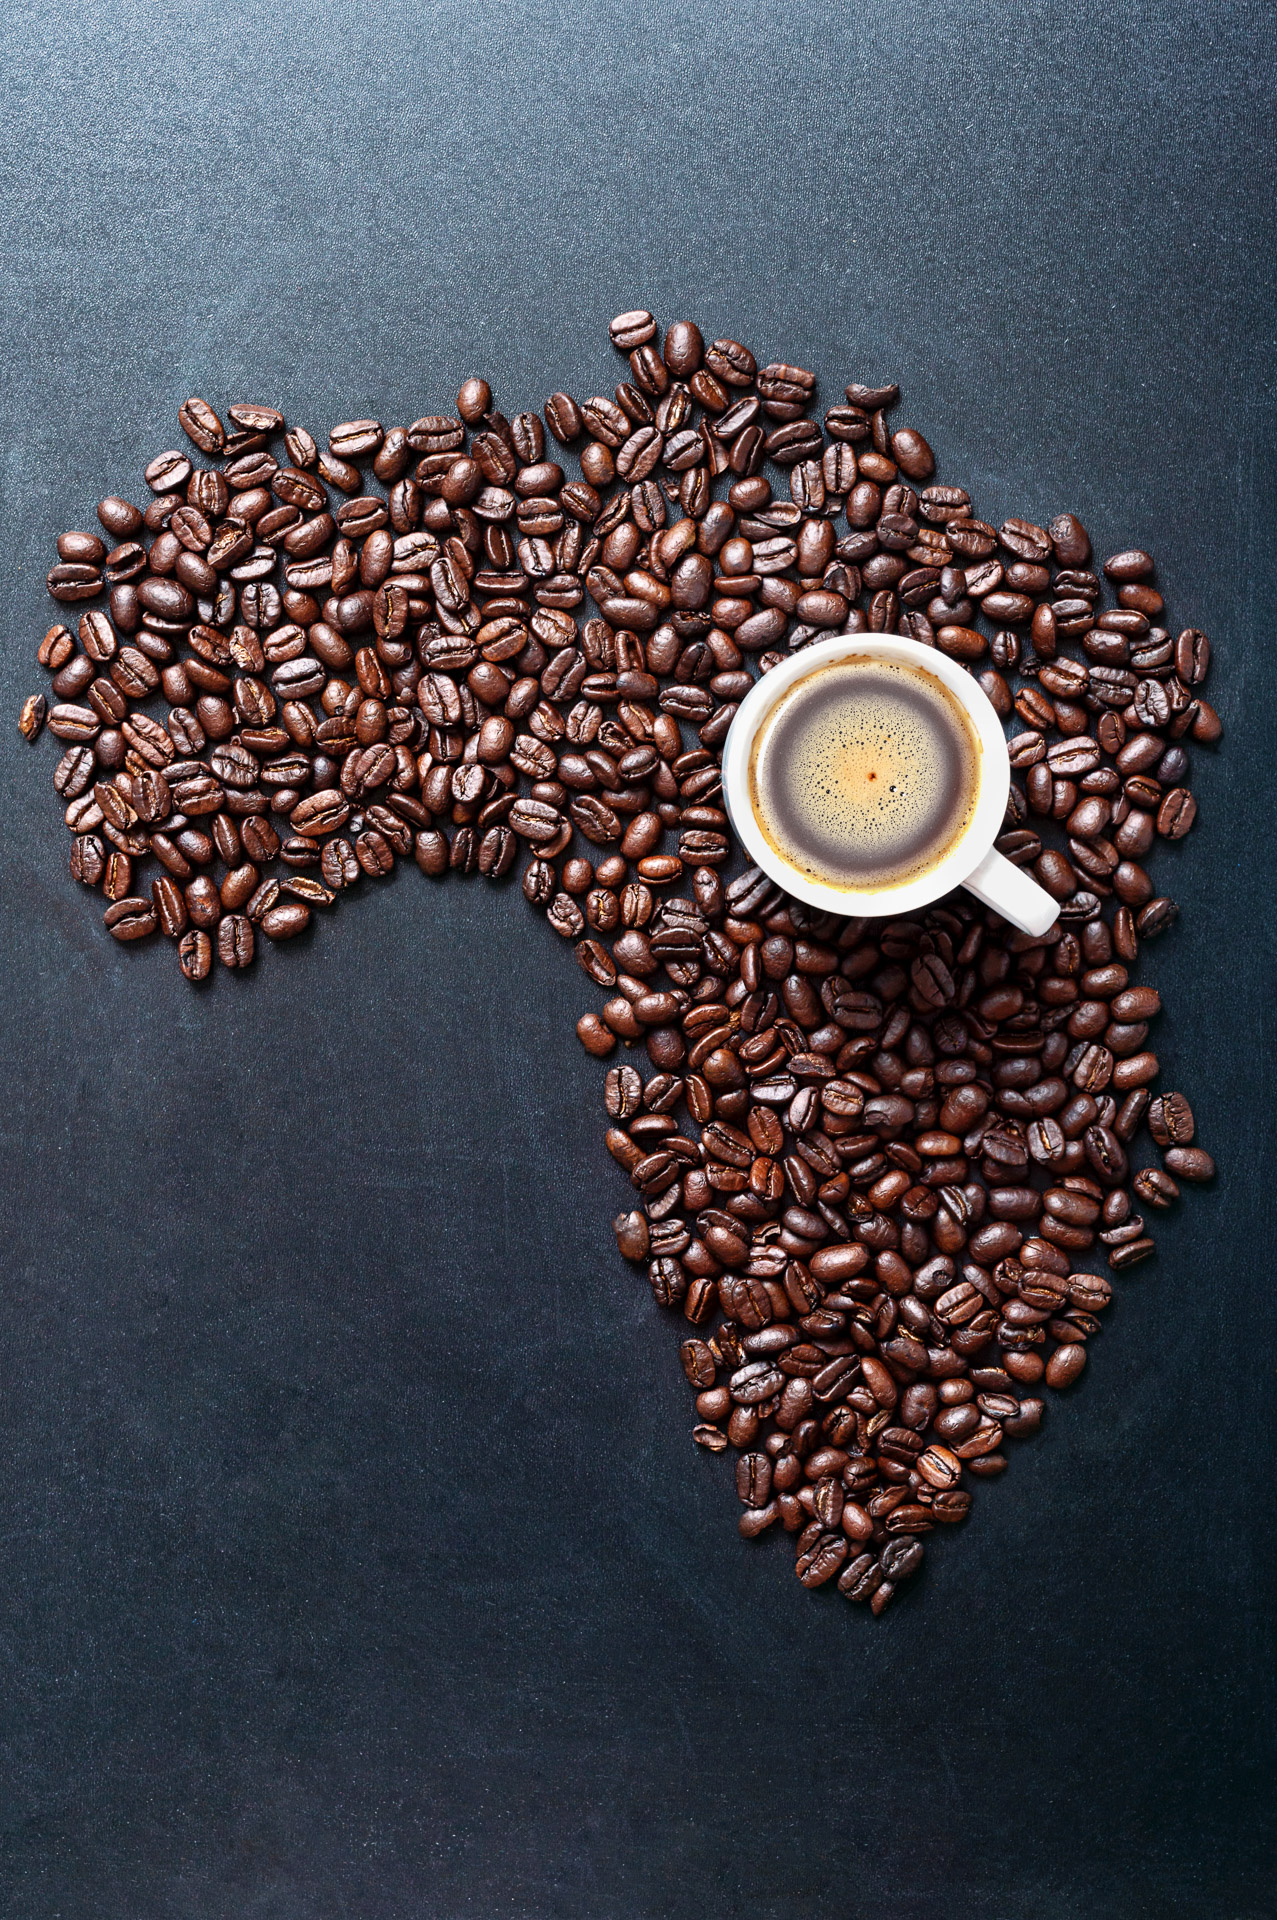 Roasted coffe beans shaping Map of the Africa on blackboard with cup of coffee. Major world coffee producers concept.